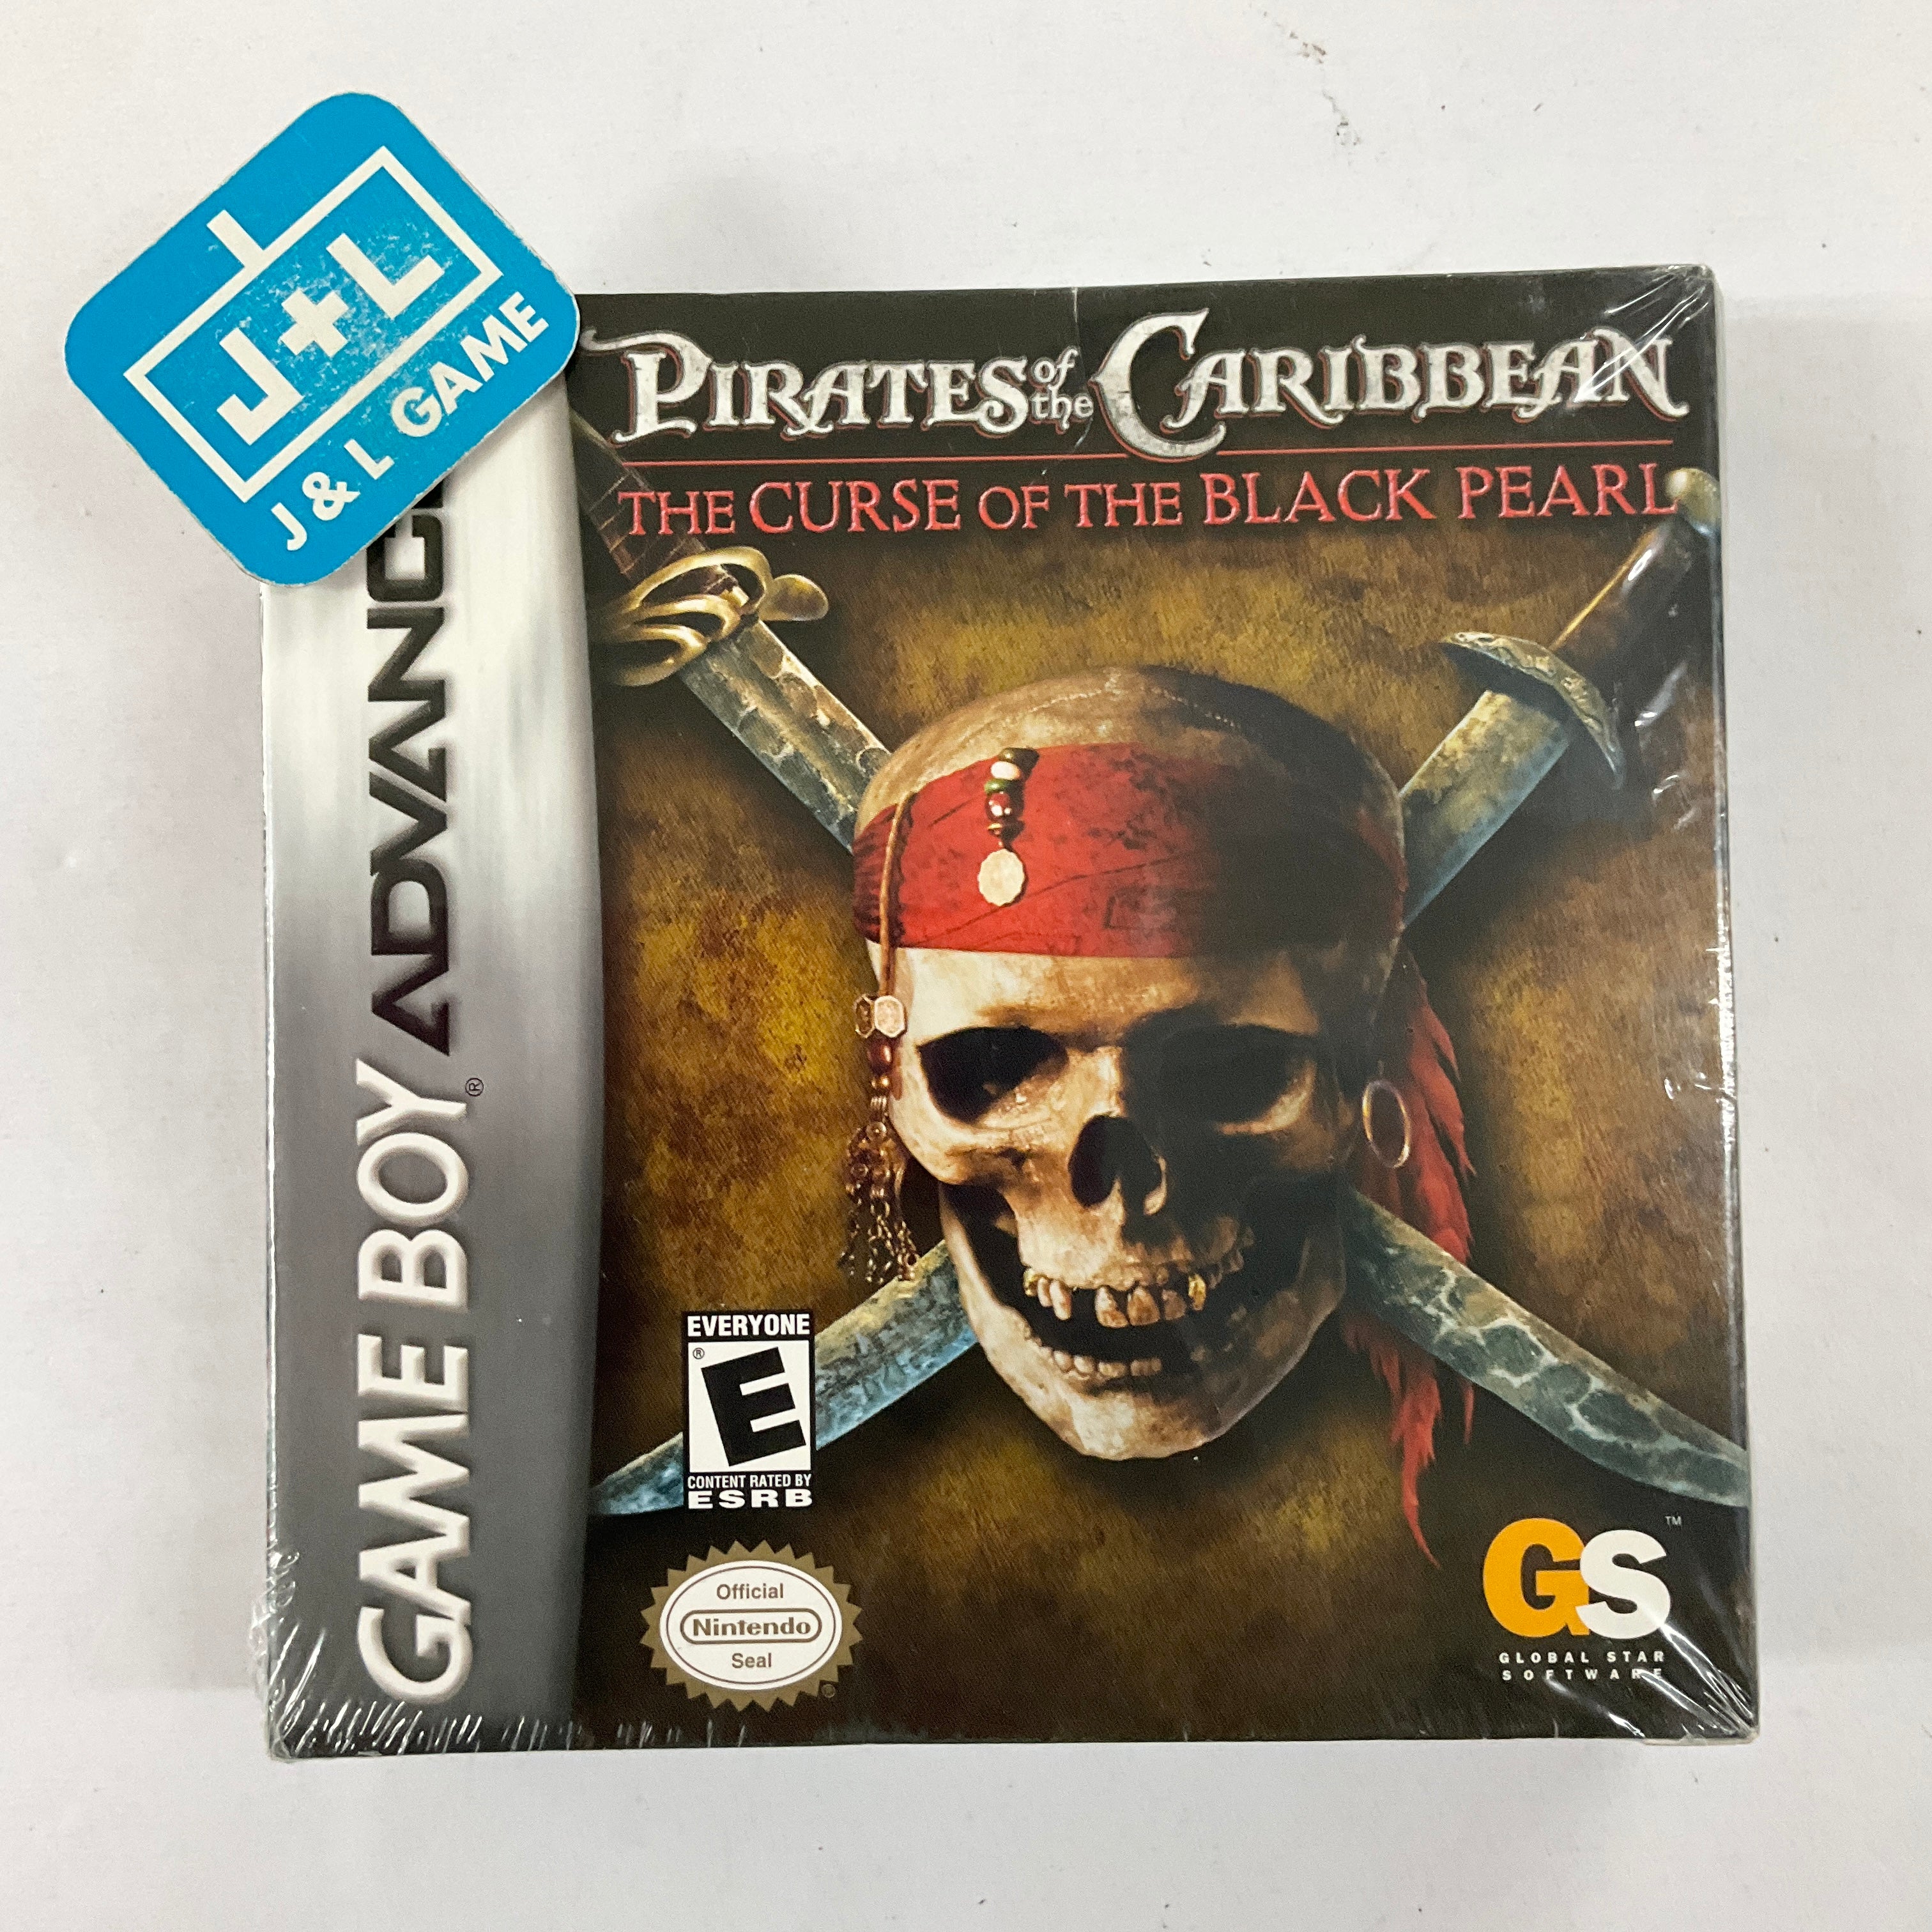 Pirates of the Caribbean: The Curse of the Black Pearl - (GBA) Game Boy Advance